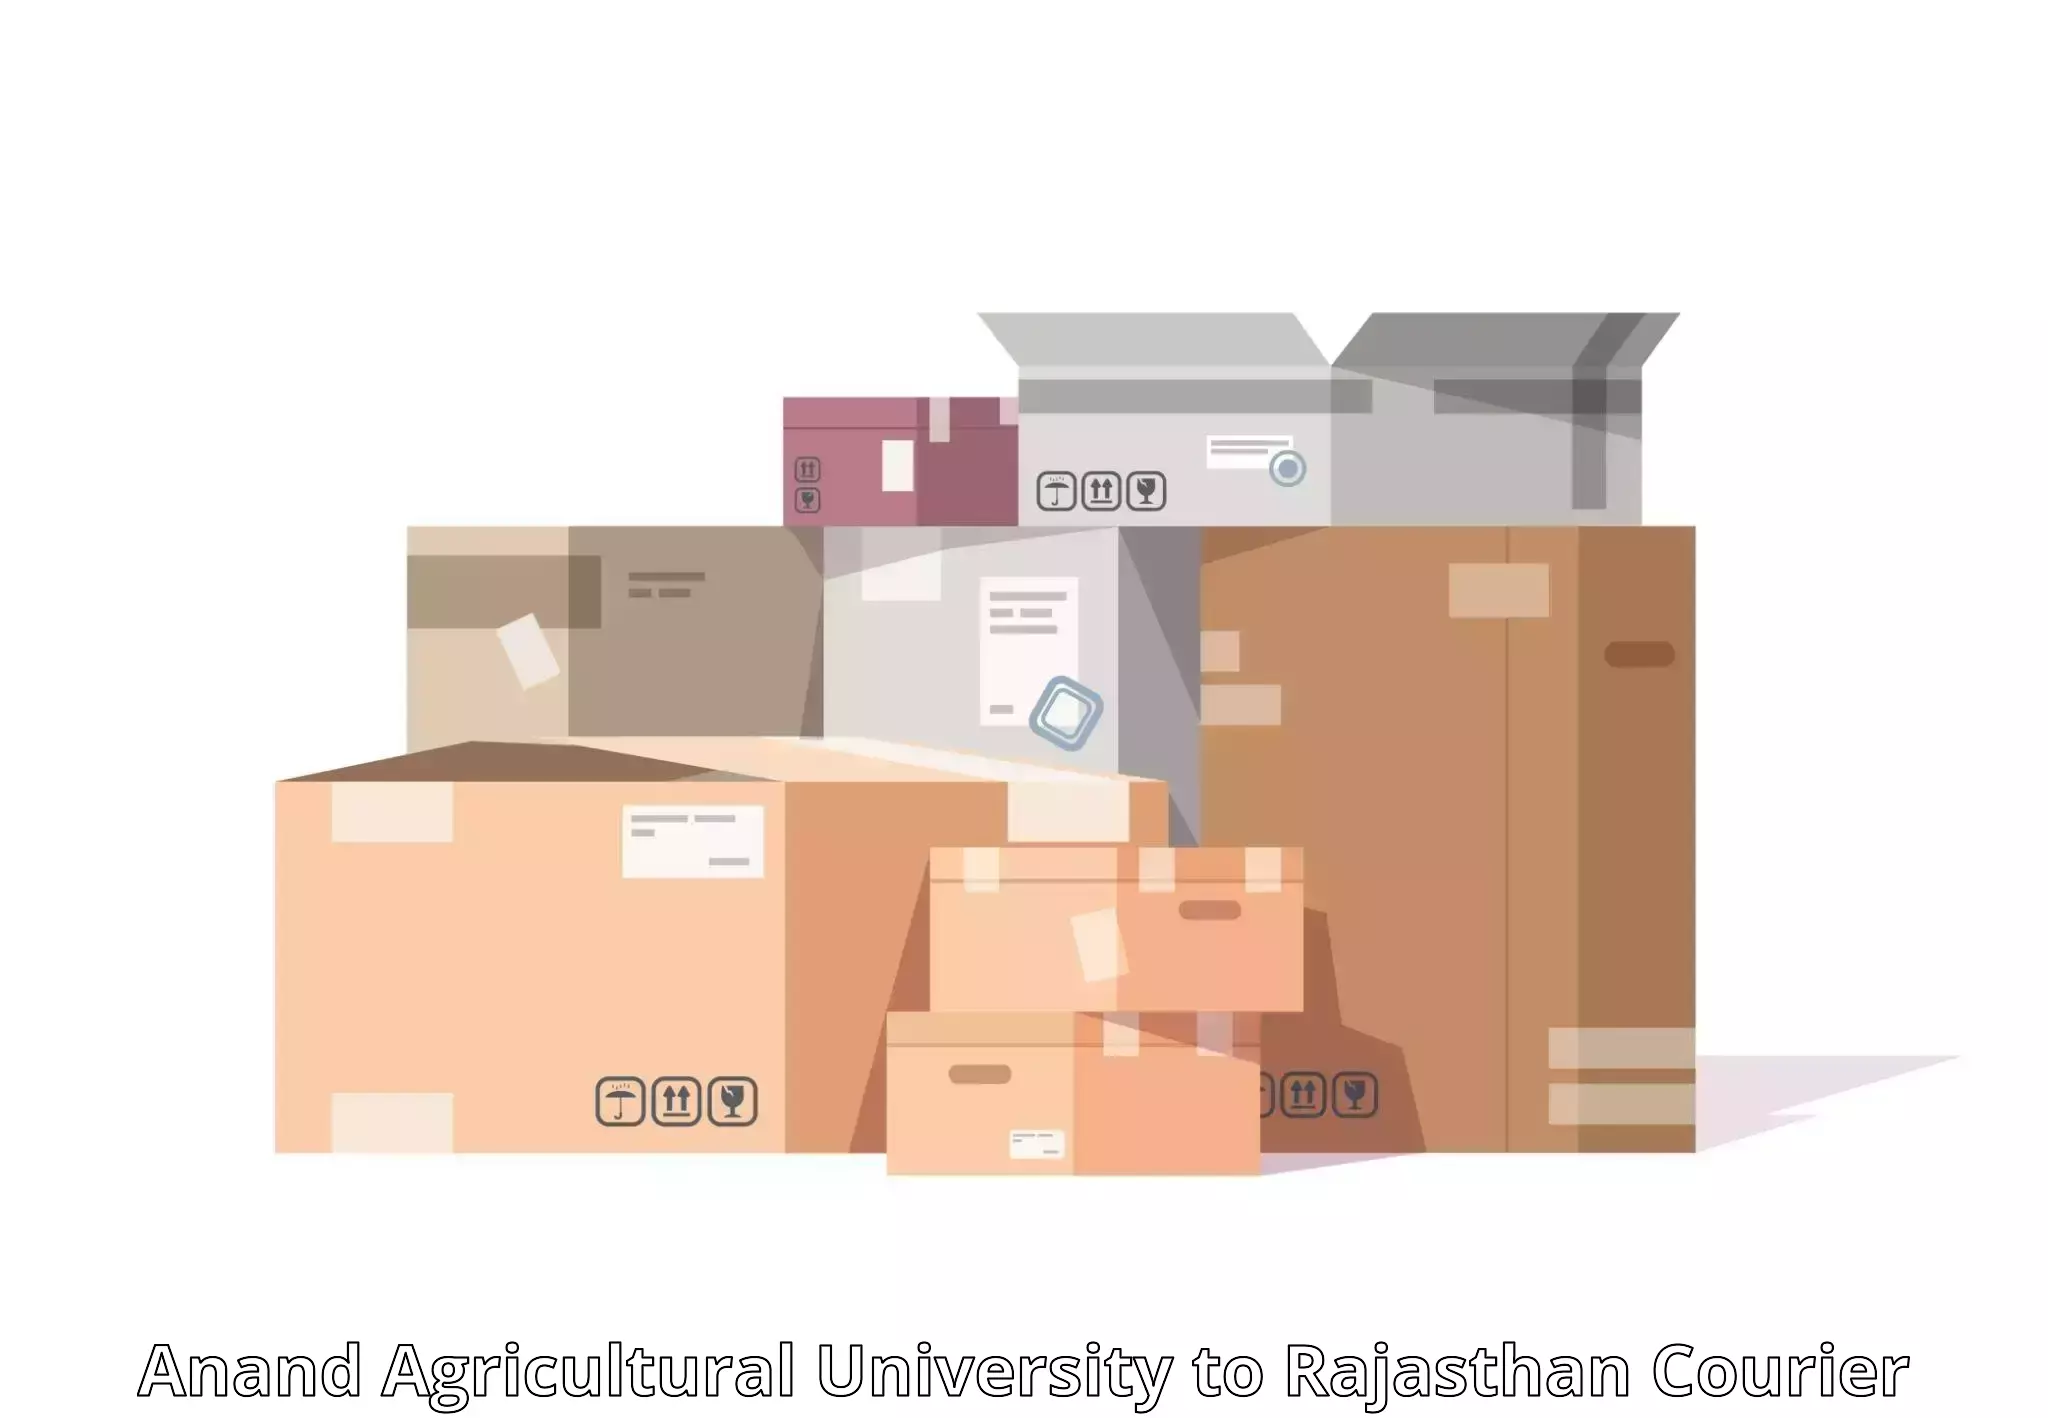 Efficient freight service Anand Agricultural University to NIT Jaipur